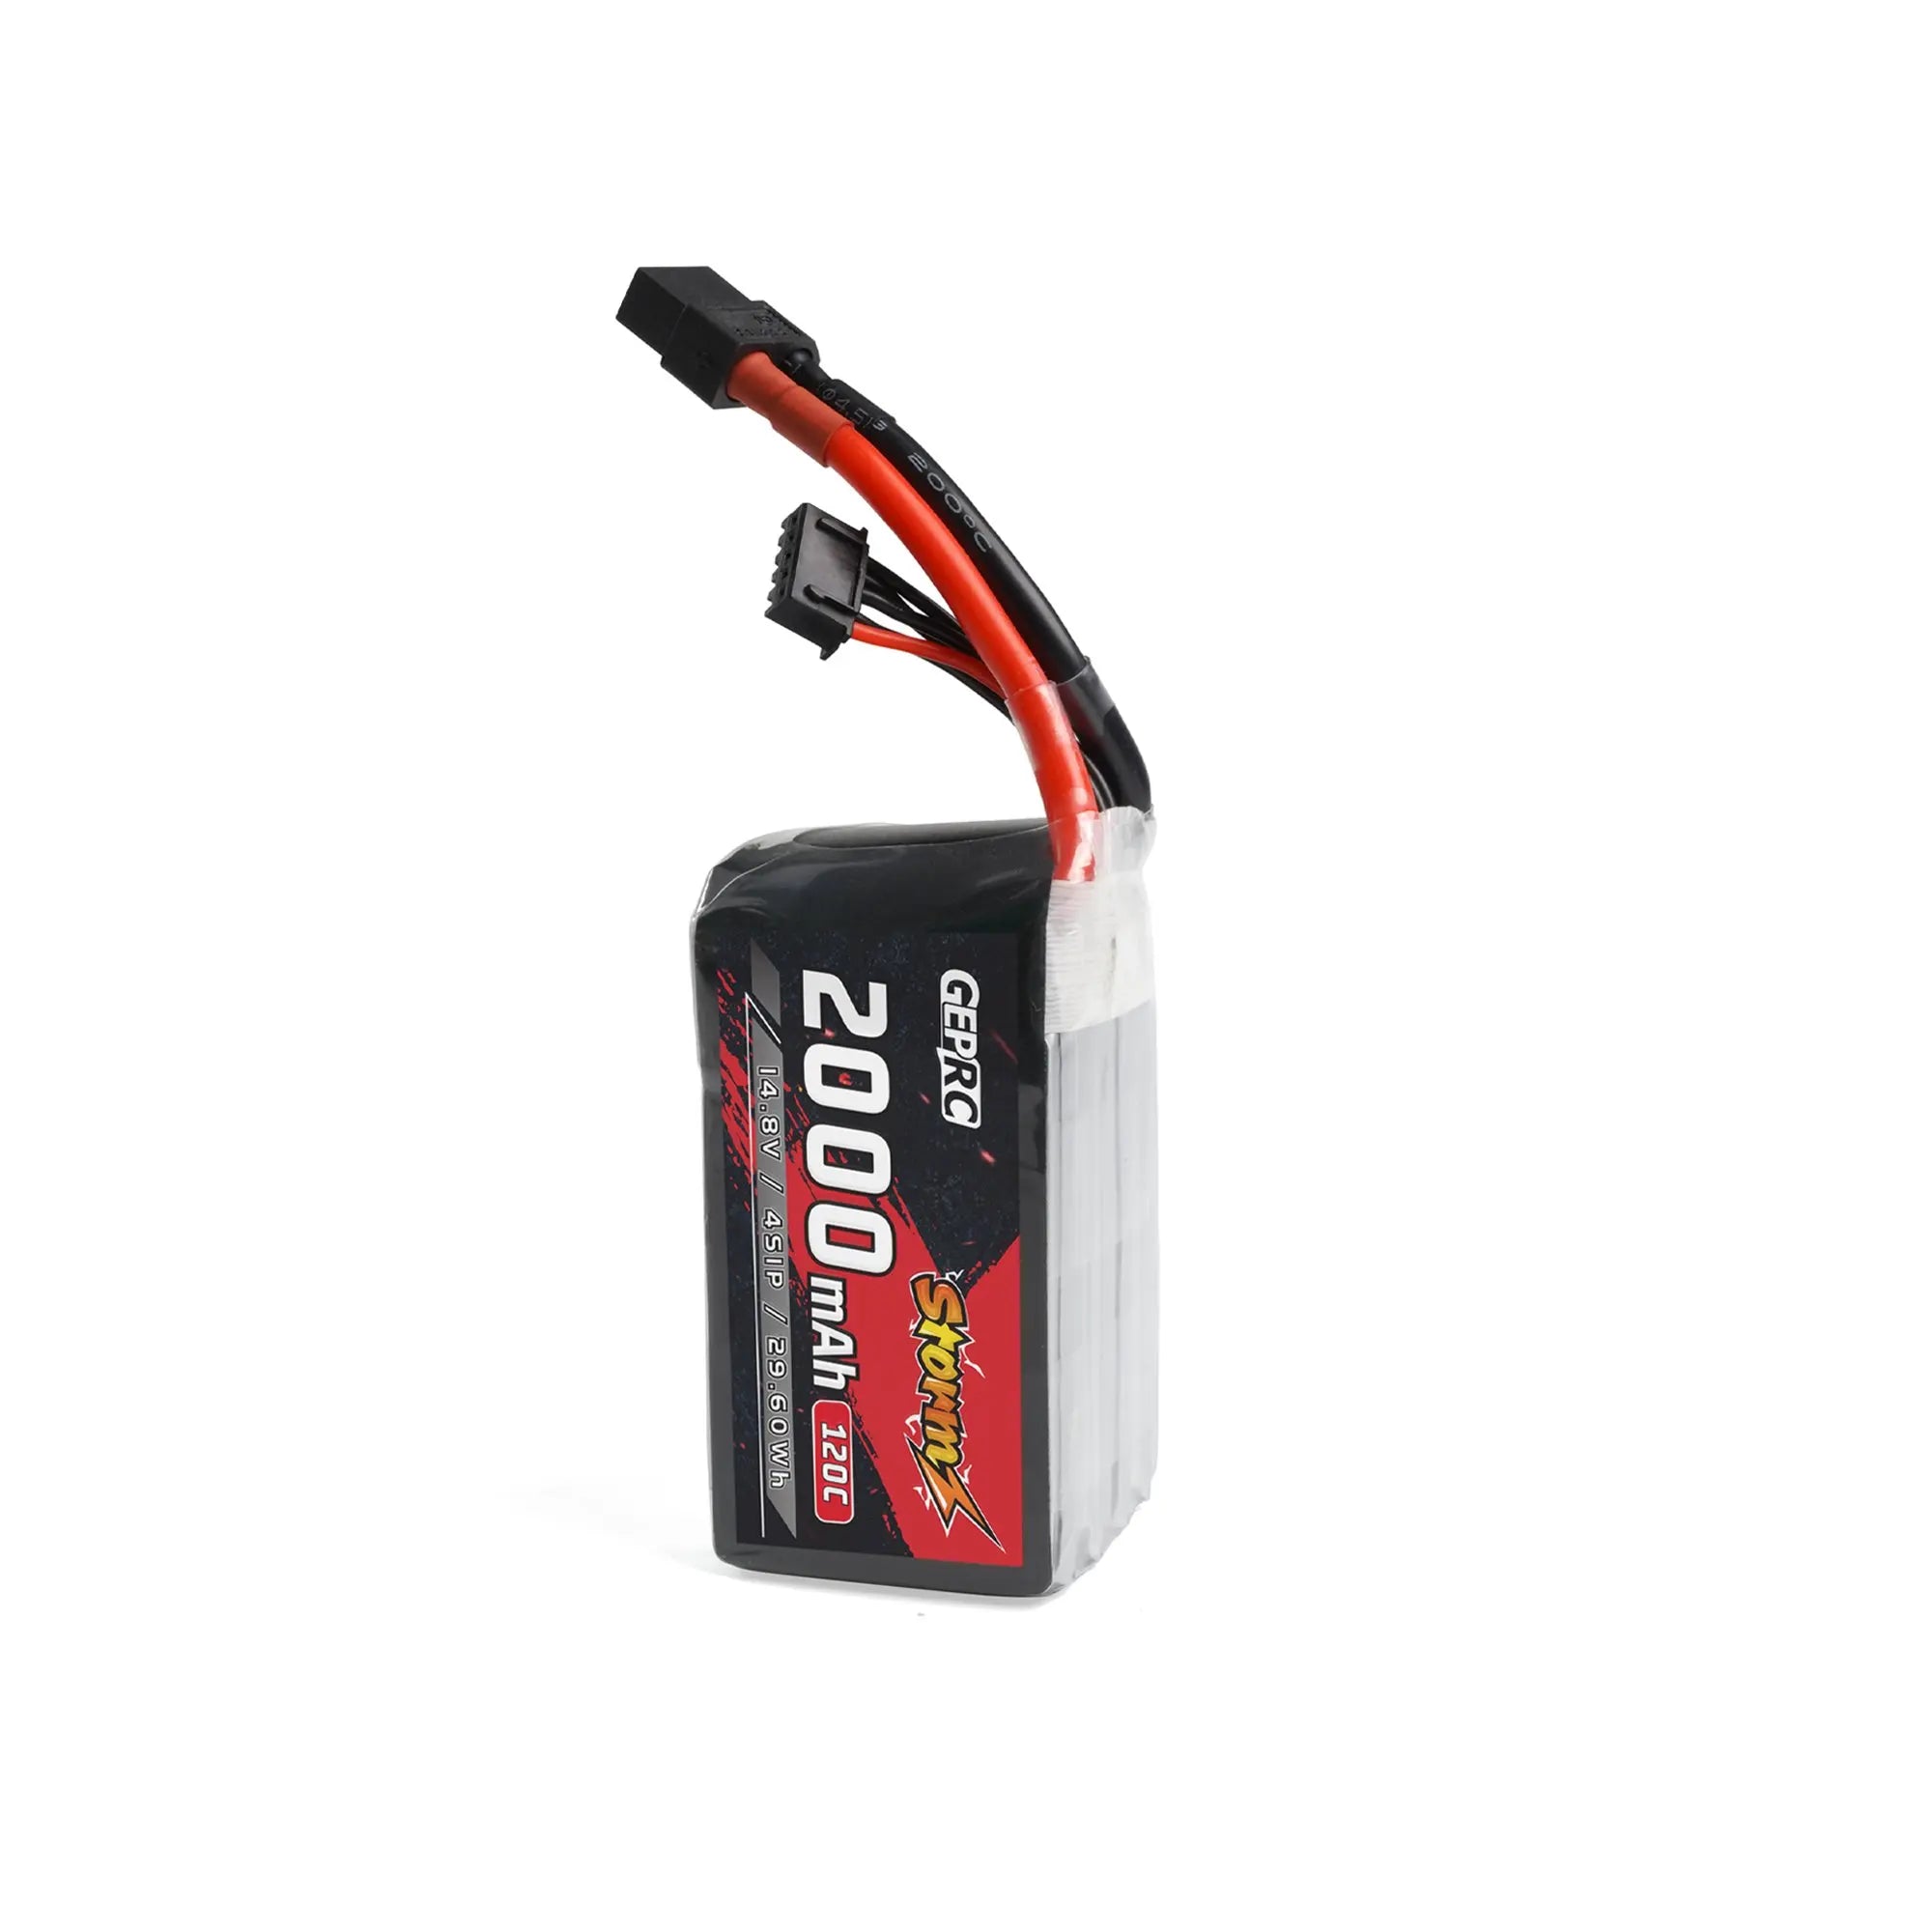 GEPRC Storm 4S 2000mAh 120C Lipo Battery SPECIFICATIONS